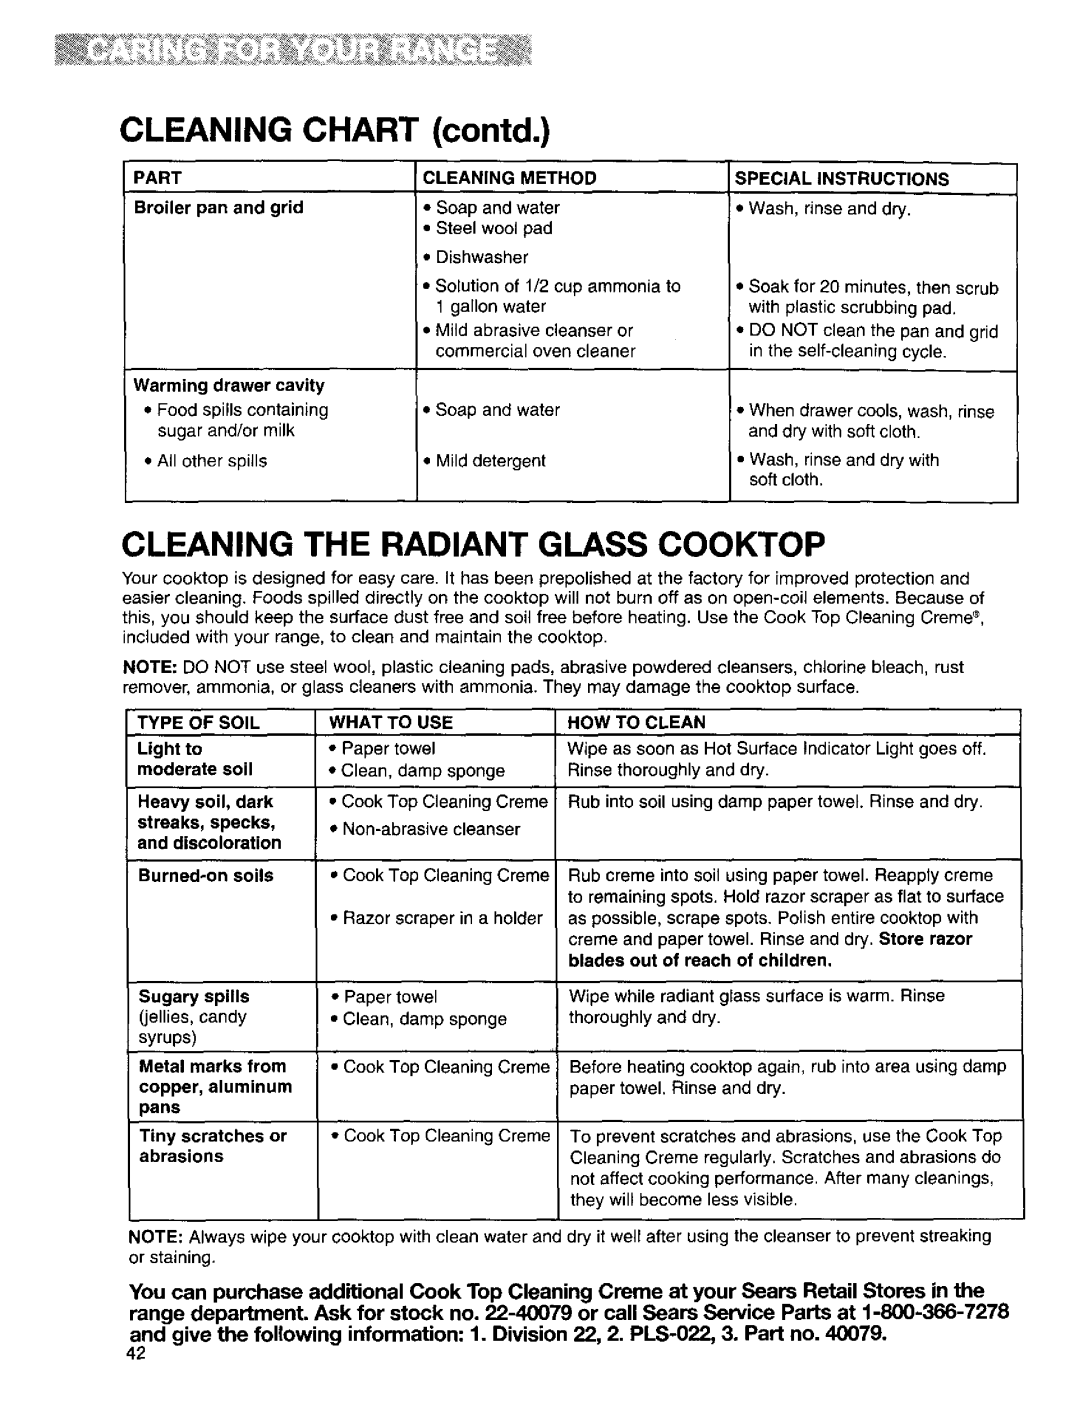 Kenmore 665.95822, 665.95824, 665.95829 manual CLEANING CHART contd, Cleaning The Radiant Glass Cooktop 